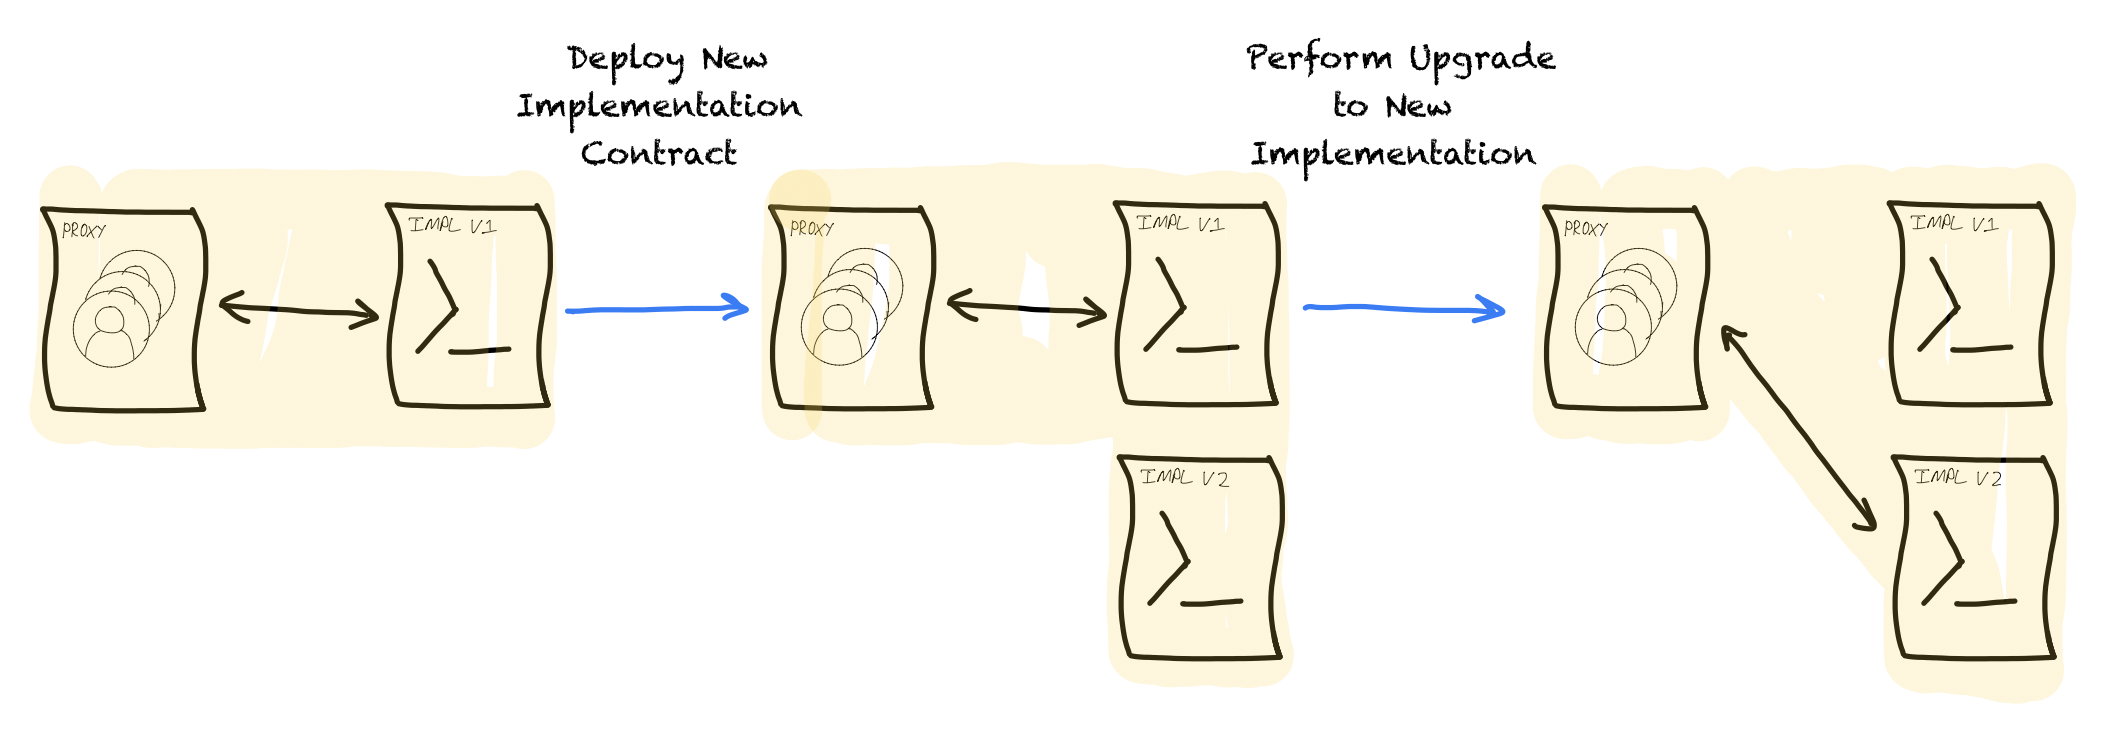 For the proxy pattern, an upgrade involves first deploying a new implementation, and then upgrading the proxy to use that new implementation. The data never moves from being stored in the proxy itself.